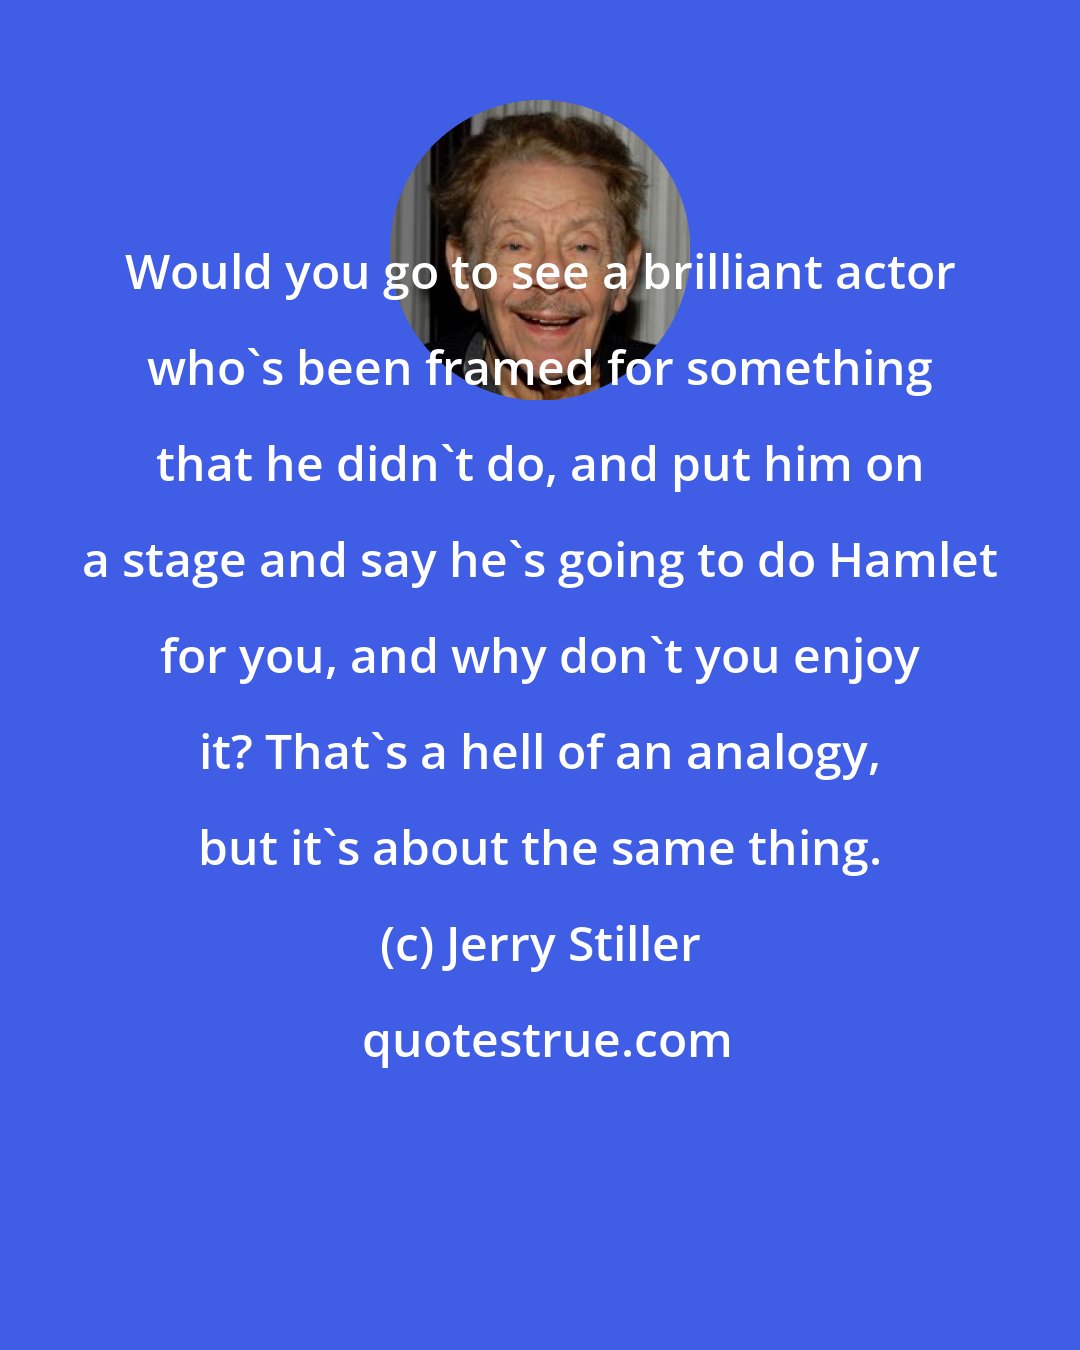 Jerry Stiller: Would you go to see a brilliant actor who's been framed for something that he didn't do, and put him on a stage and say he's going to do Hamlet for you, and why don't you enjoy it? That's a hell of an analogy, but it's about the same thing.